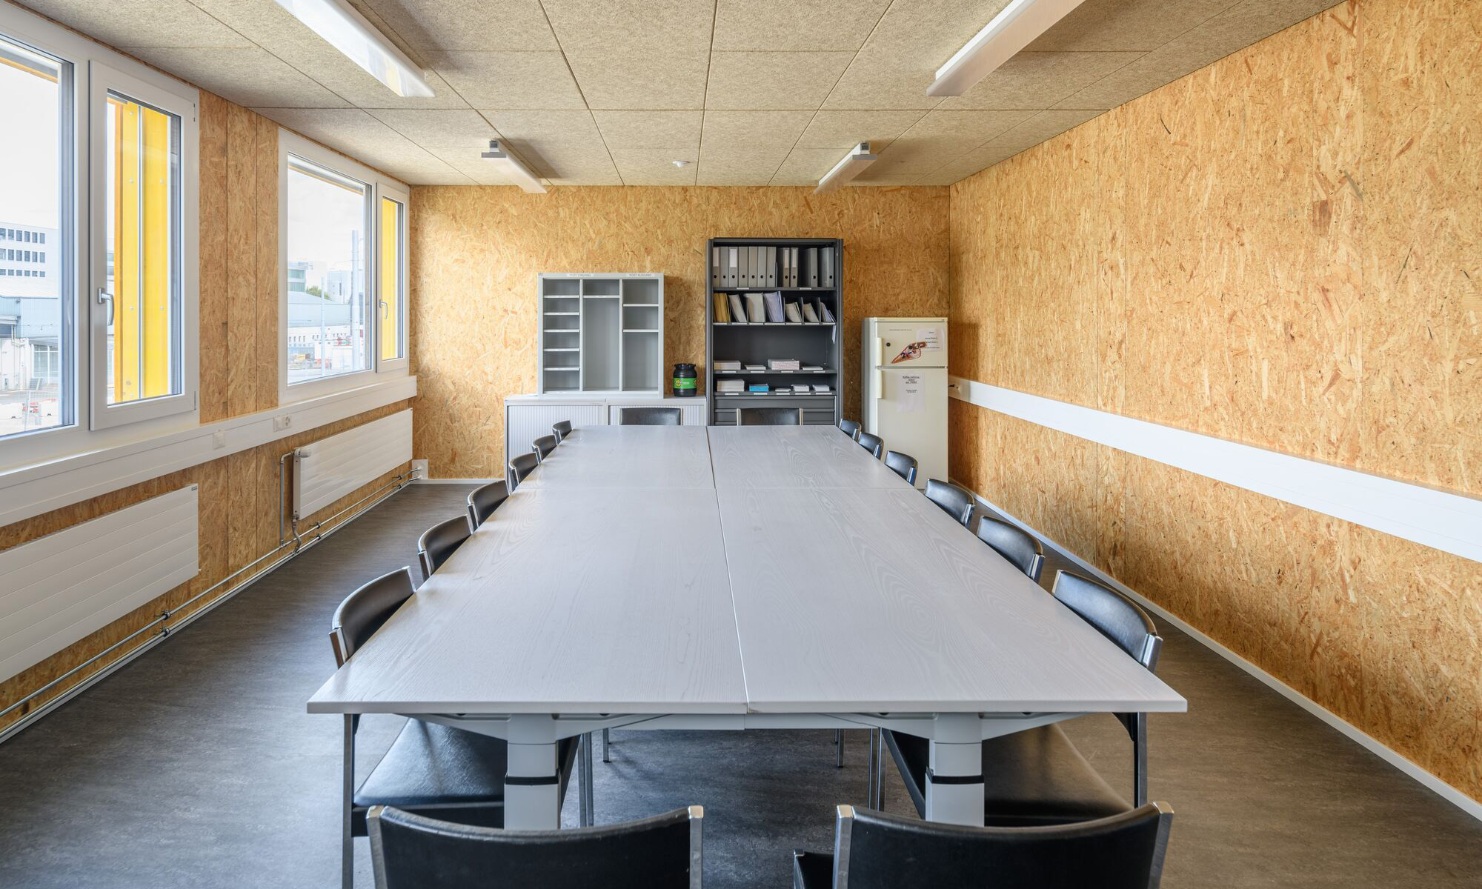 Interior view of the meeting room in the temporary office building<br/><br/>